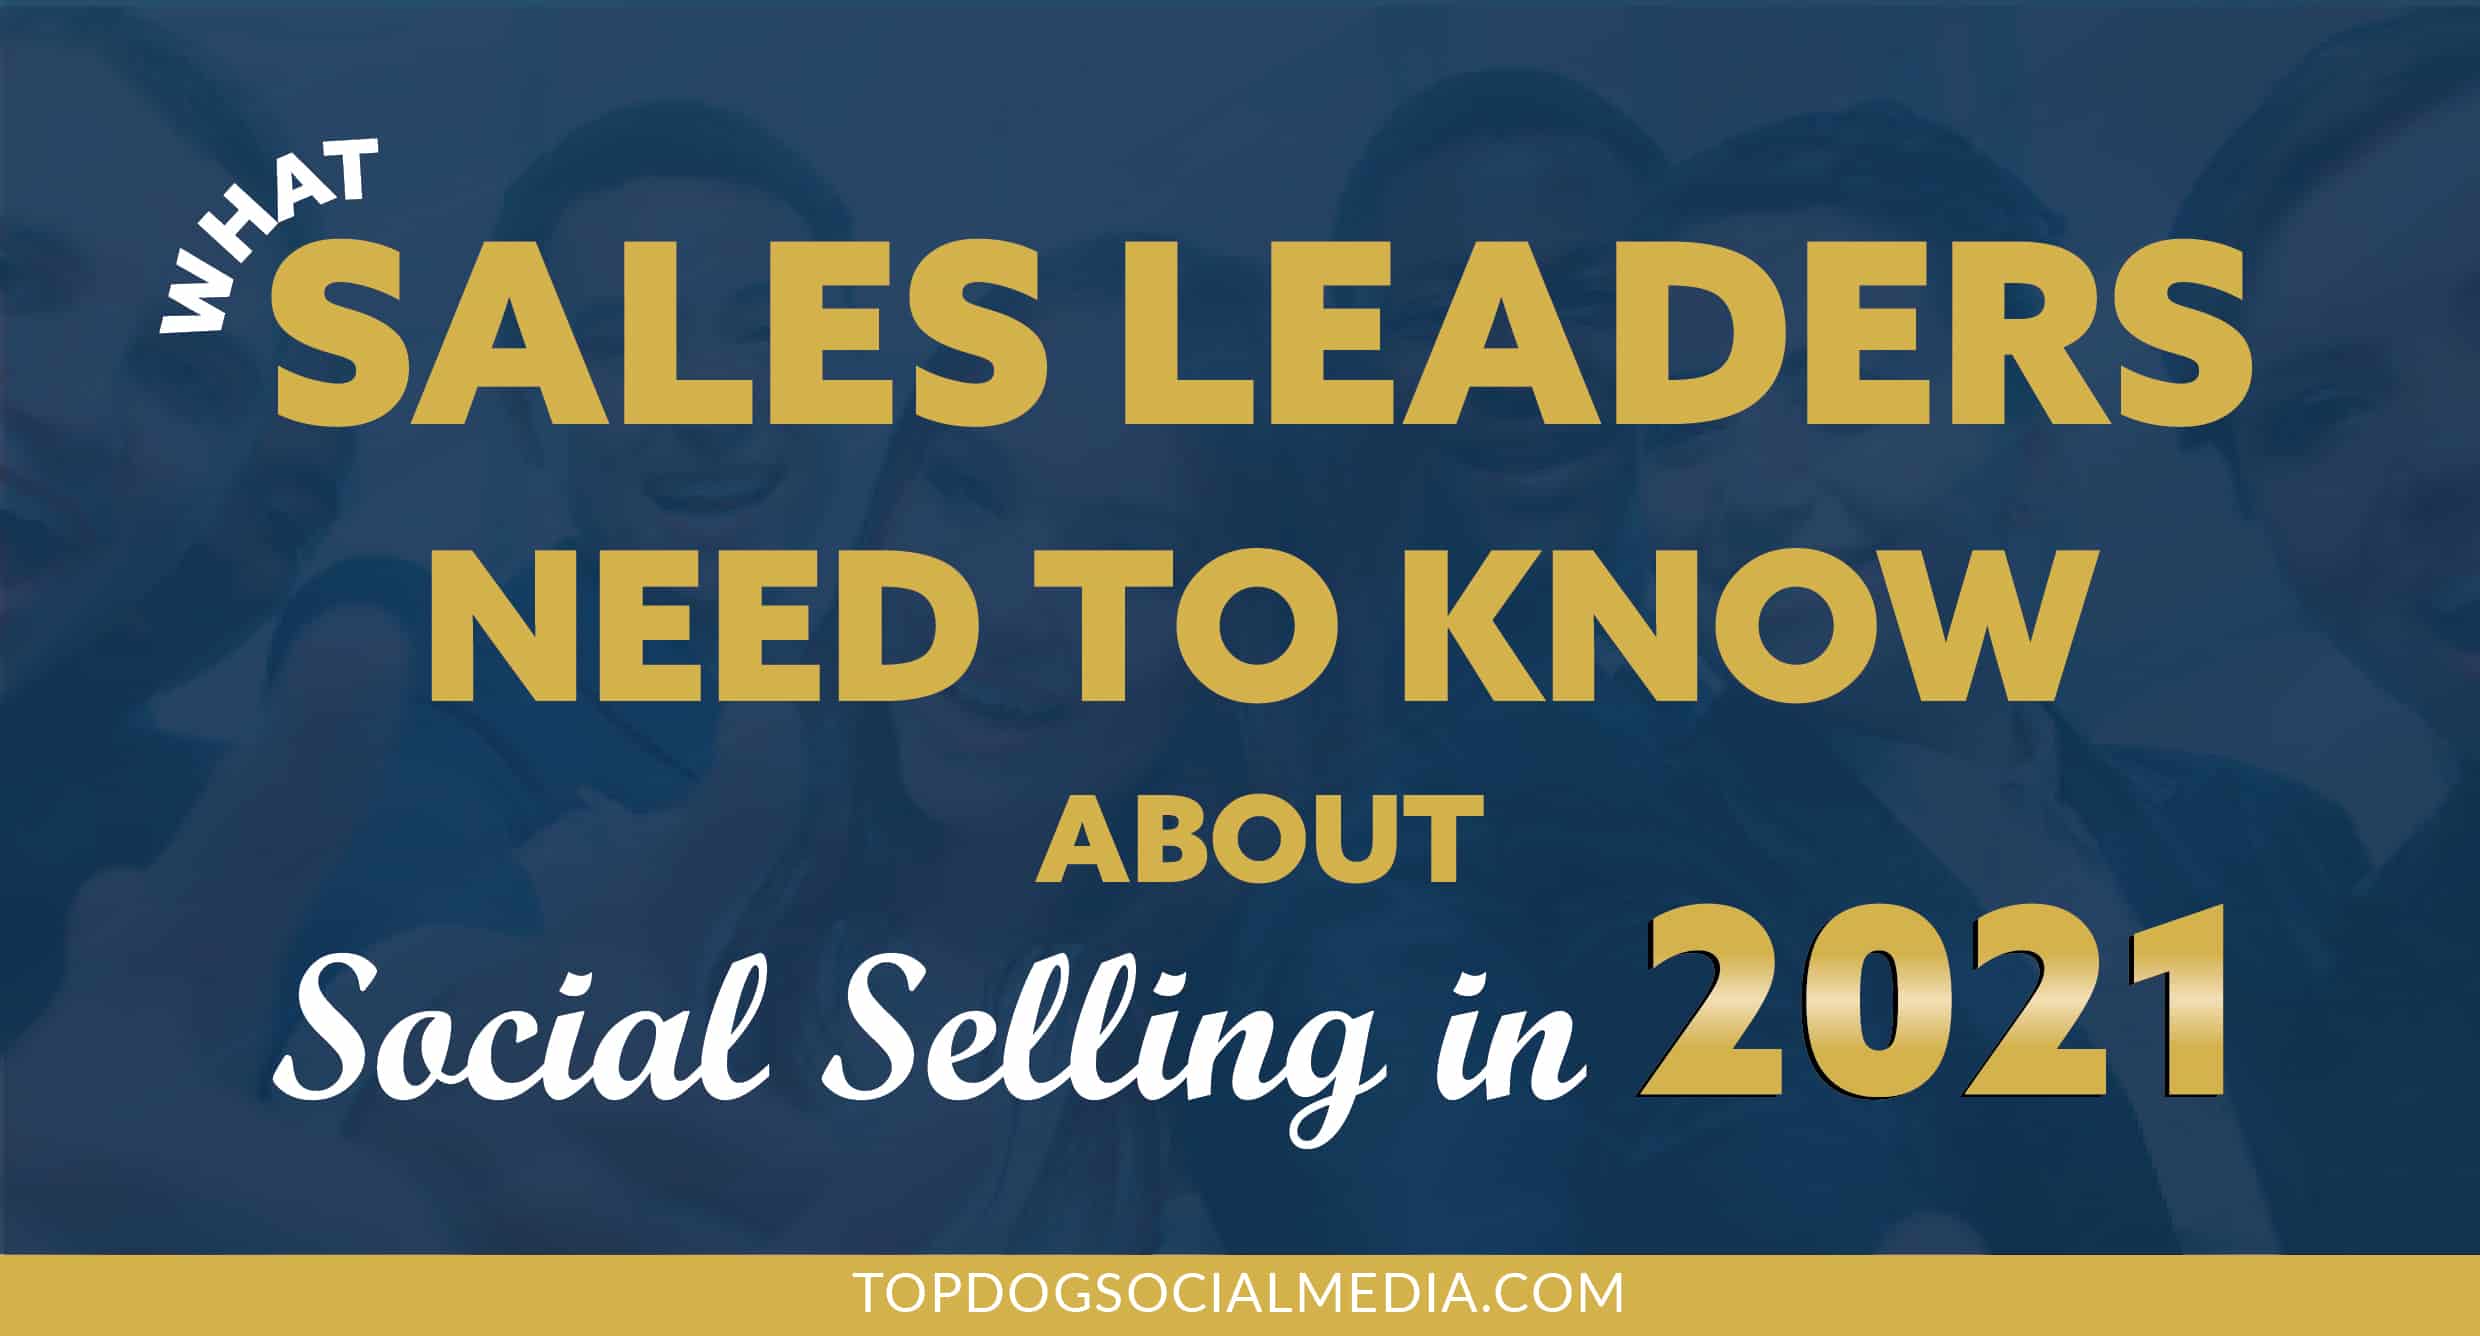 What Sales Leaders Need to Know About Social Selling in 2021 (and Beyond)